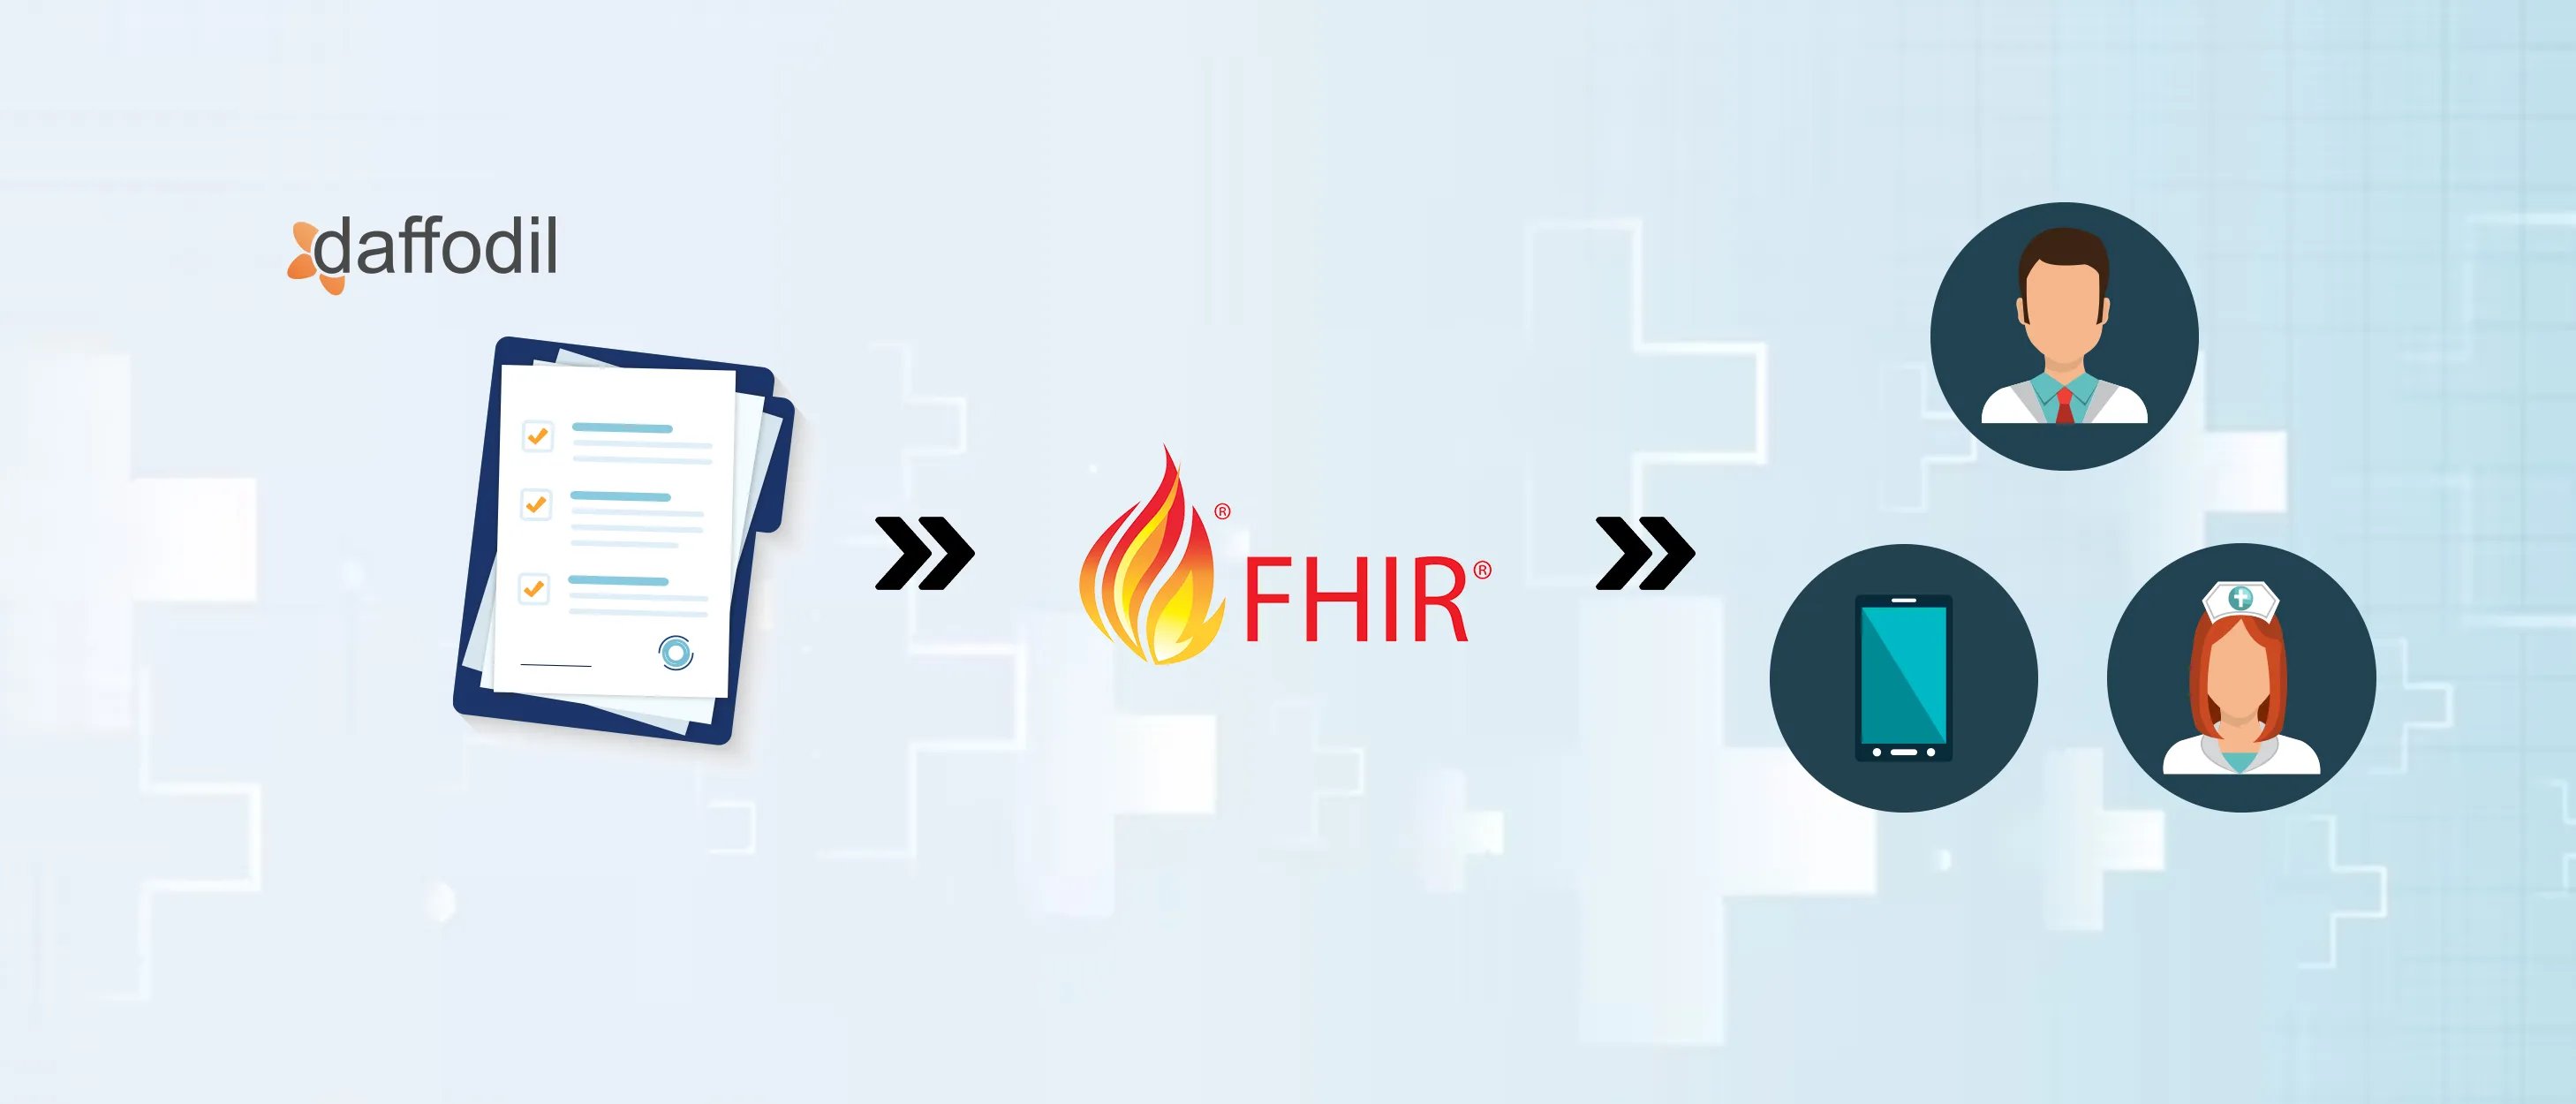 What is FHIR and how can it benefit the Healthcare system